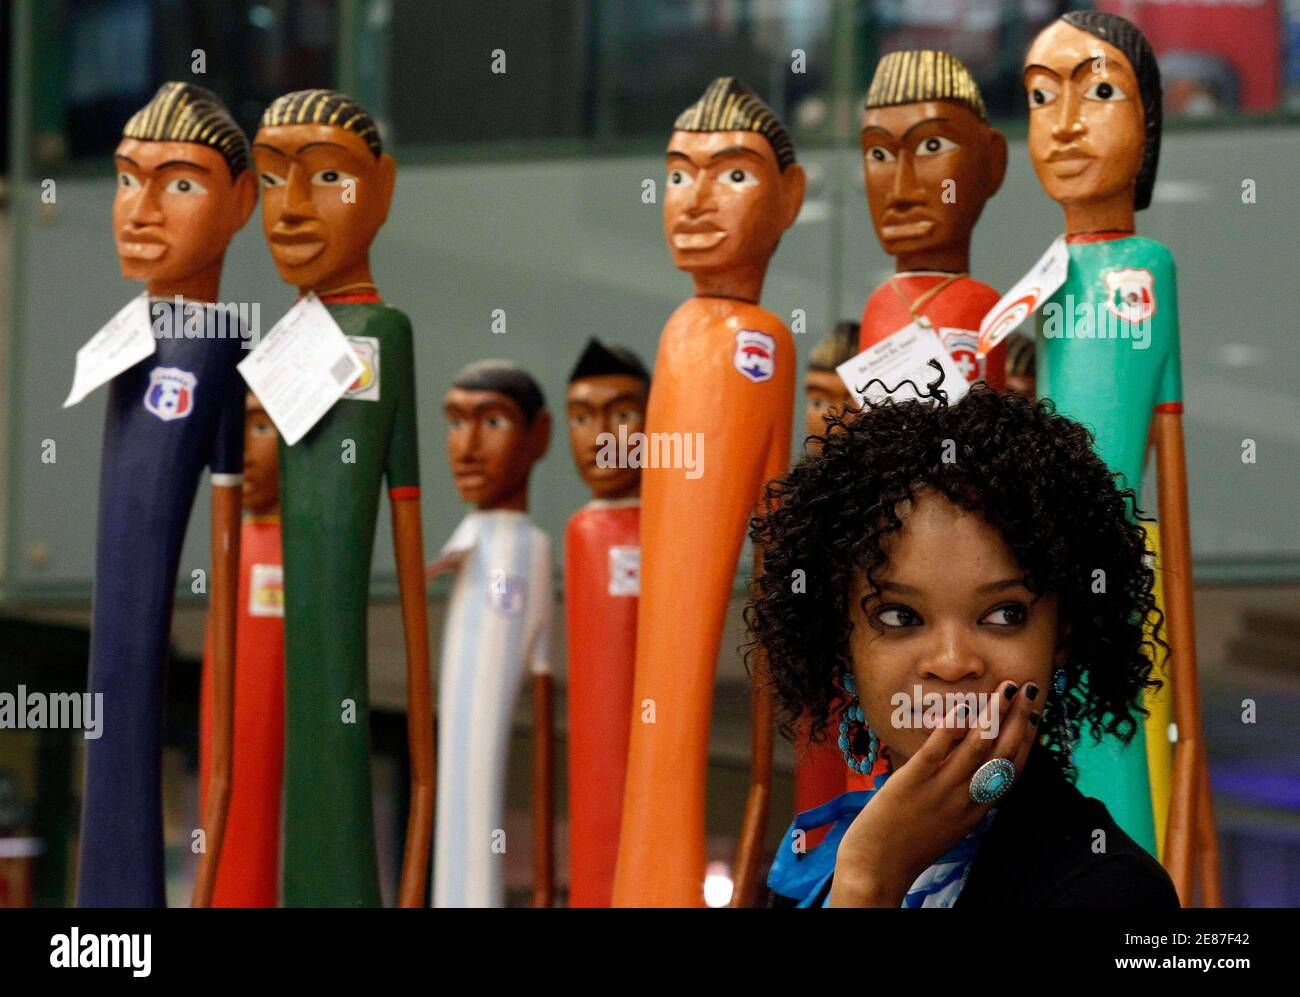 A woman stands in front of the wooden statues representing the various soccer teams taking part in the 2010 World Cup at a shopping centre at Sandton in Johannesburg June 9, 2010. The 2010 World Cup kicks off on June 11 at Soccer City stadium with the match between South Africa and Mexico.  REUTERS/Alessandro Bianchi   (SOUTH AFRICA - Tags: SPORT SOCCER WORLD CUP) Stock Photo